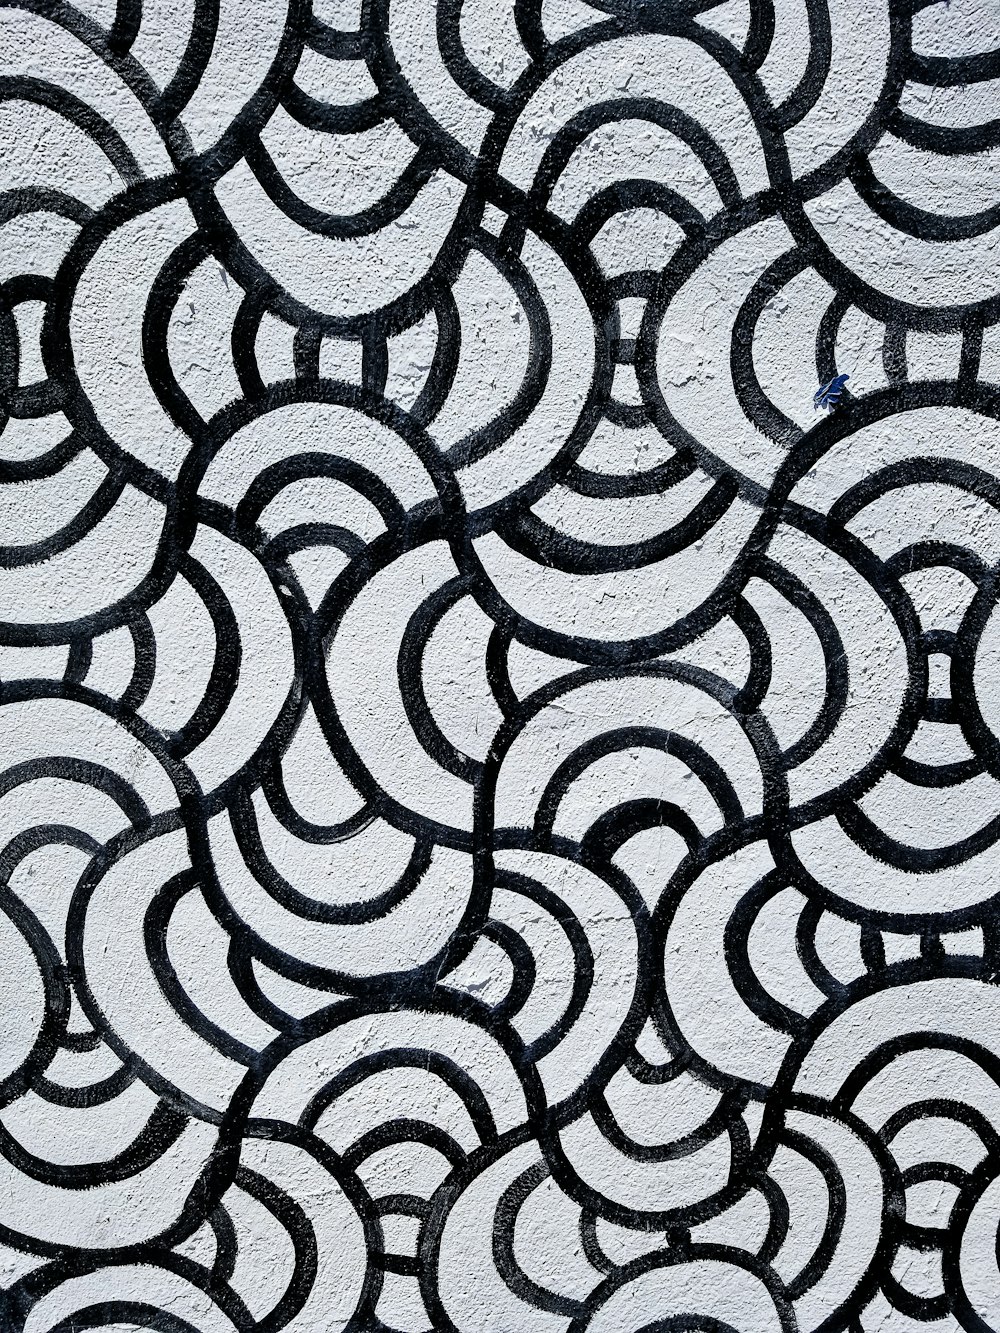 cool patterns and designs in black and white